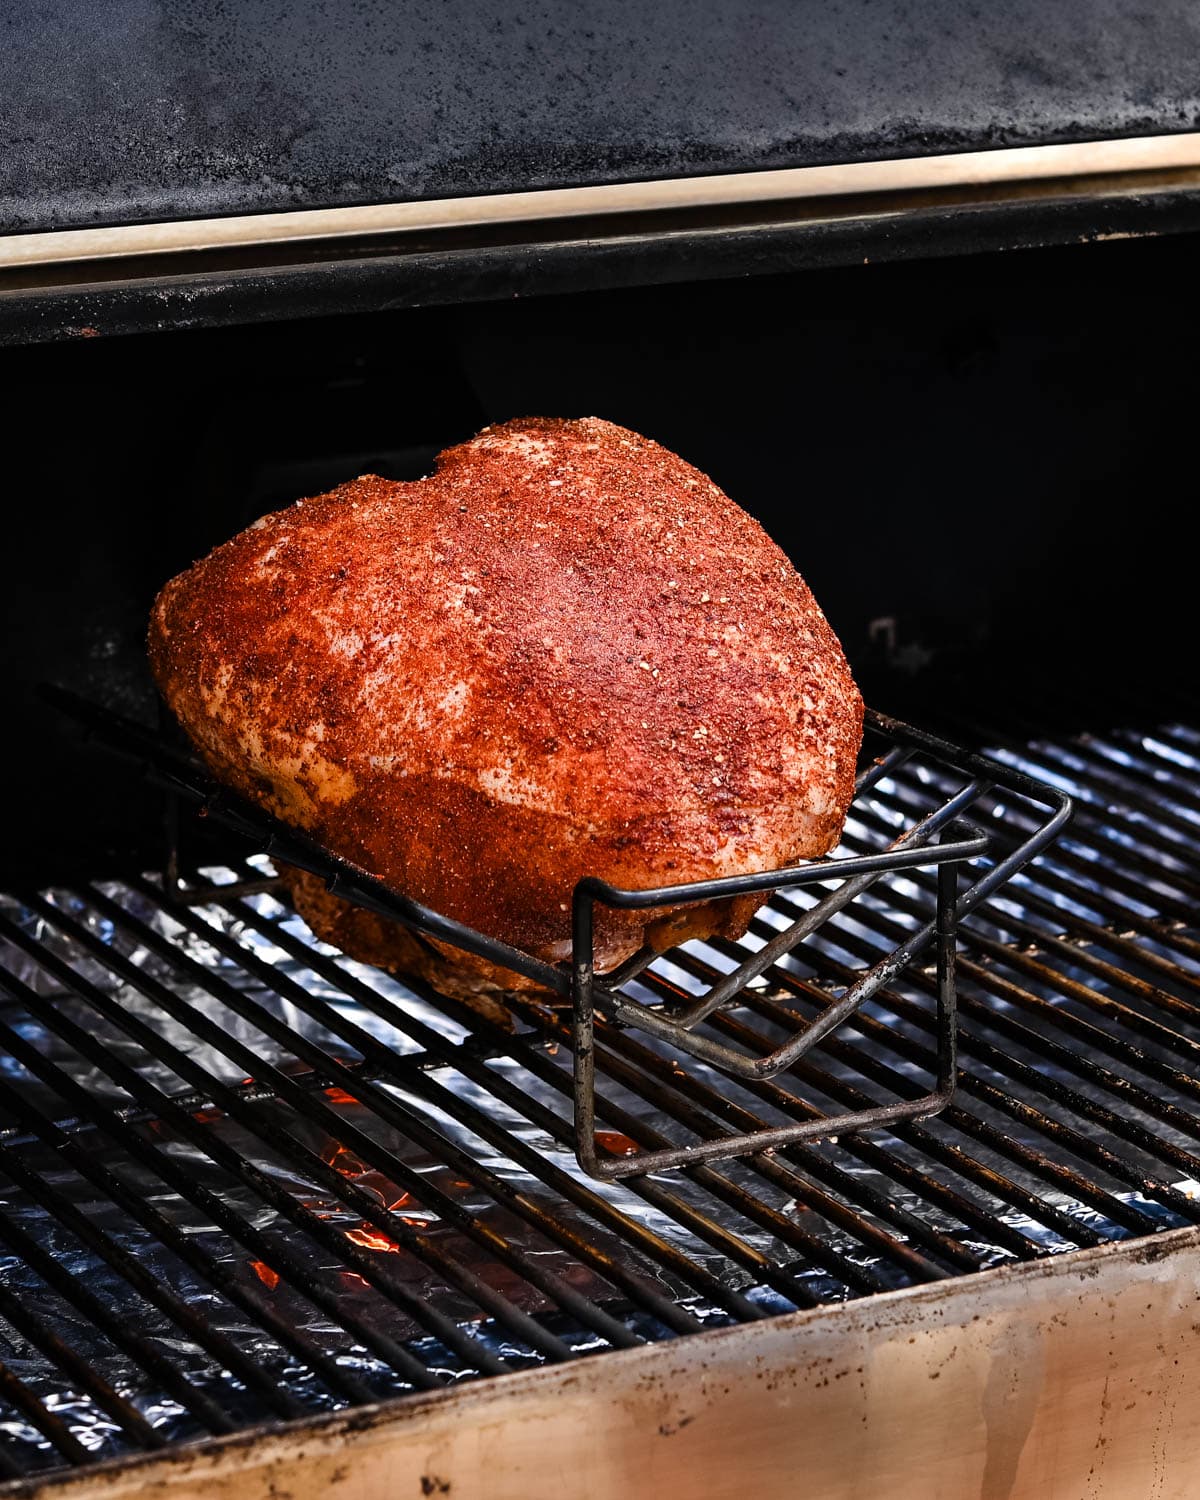 Fitting the turkey breast on a rack to smoke it.